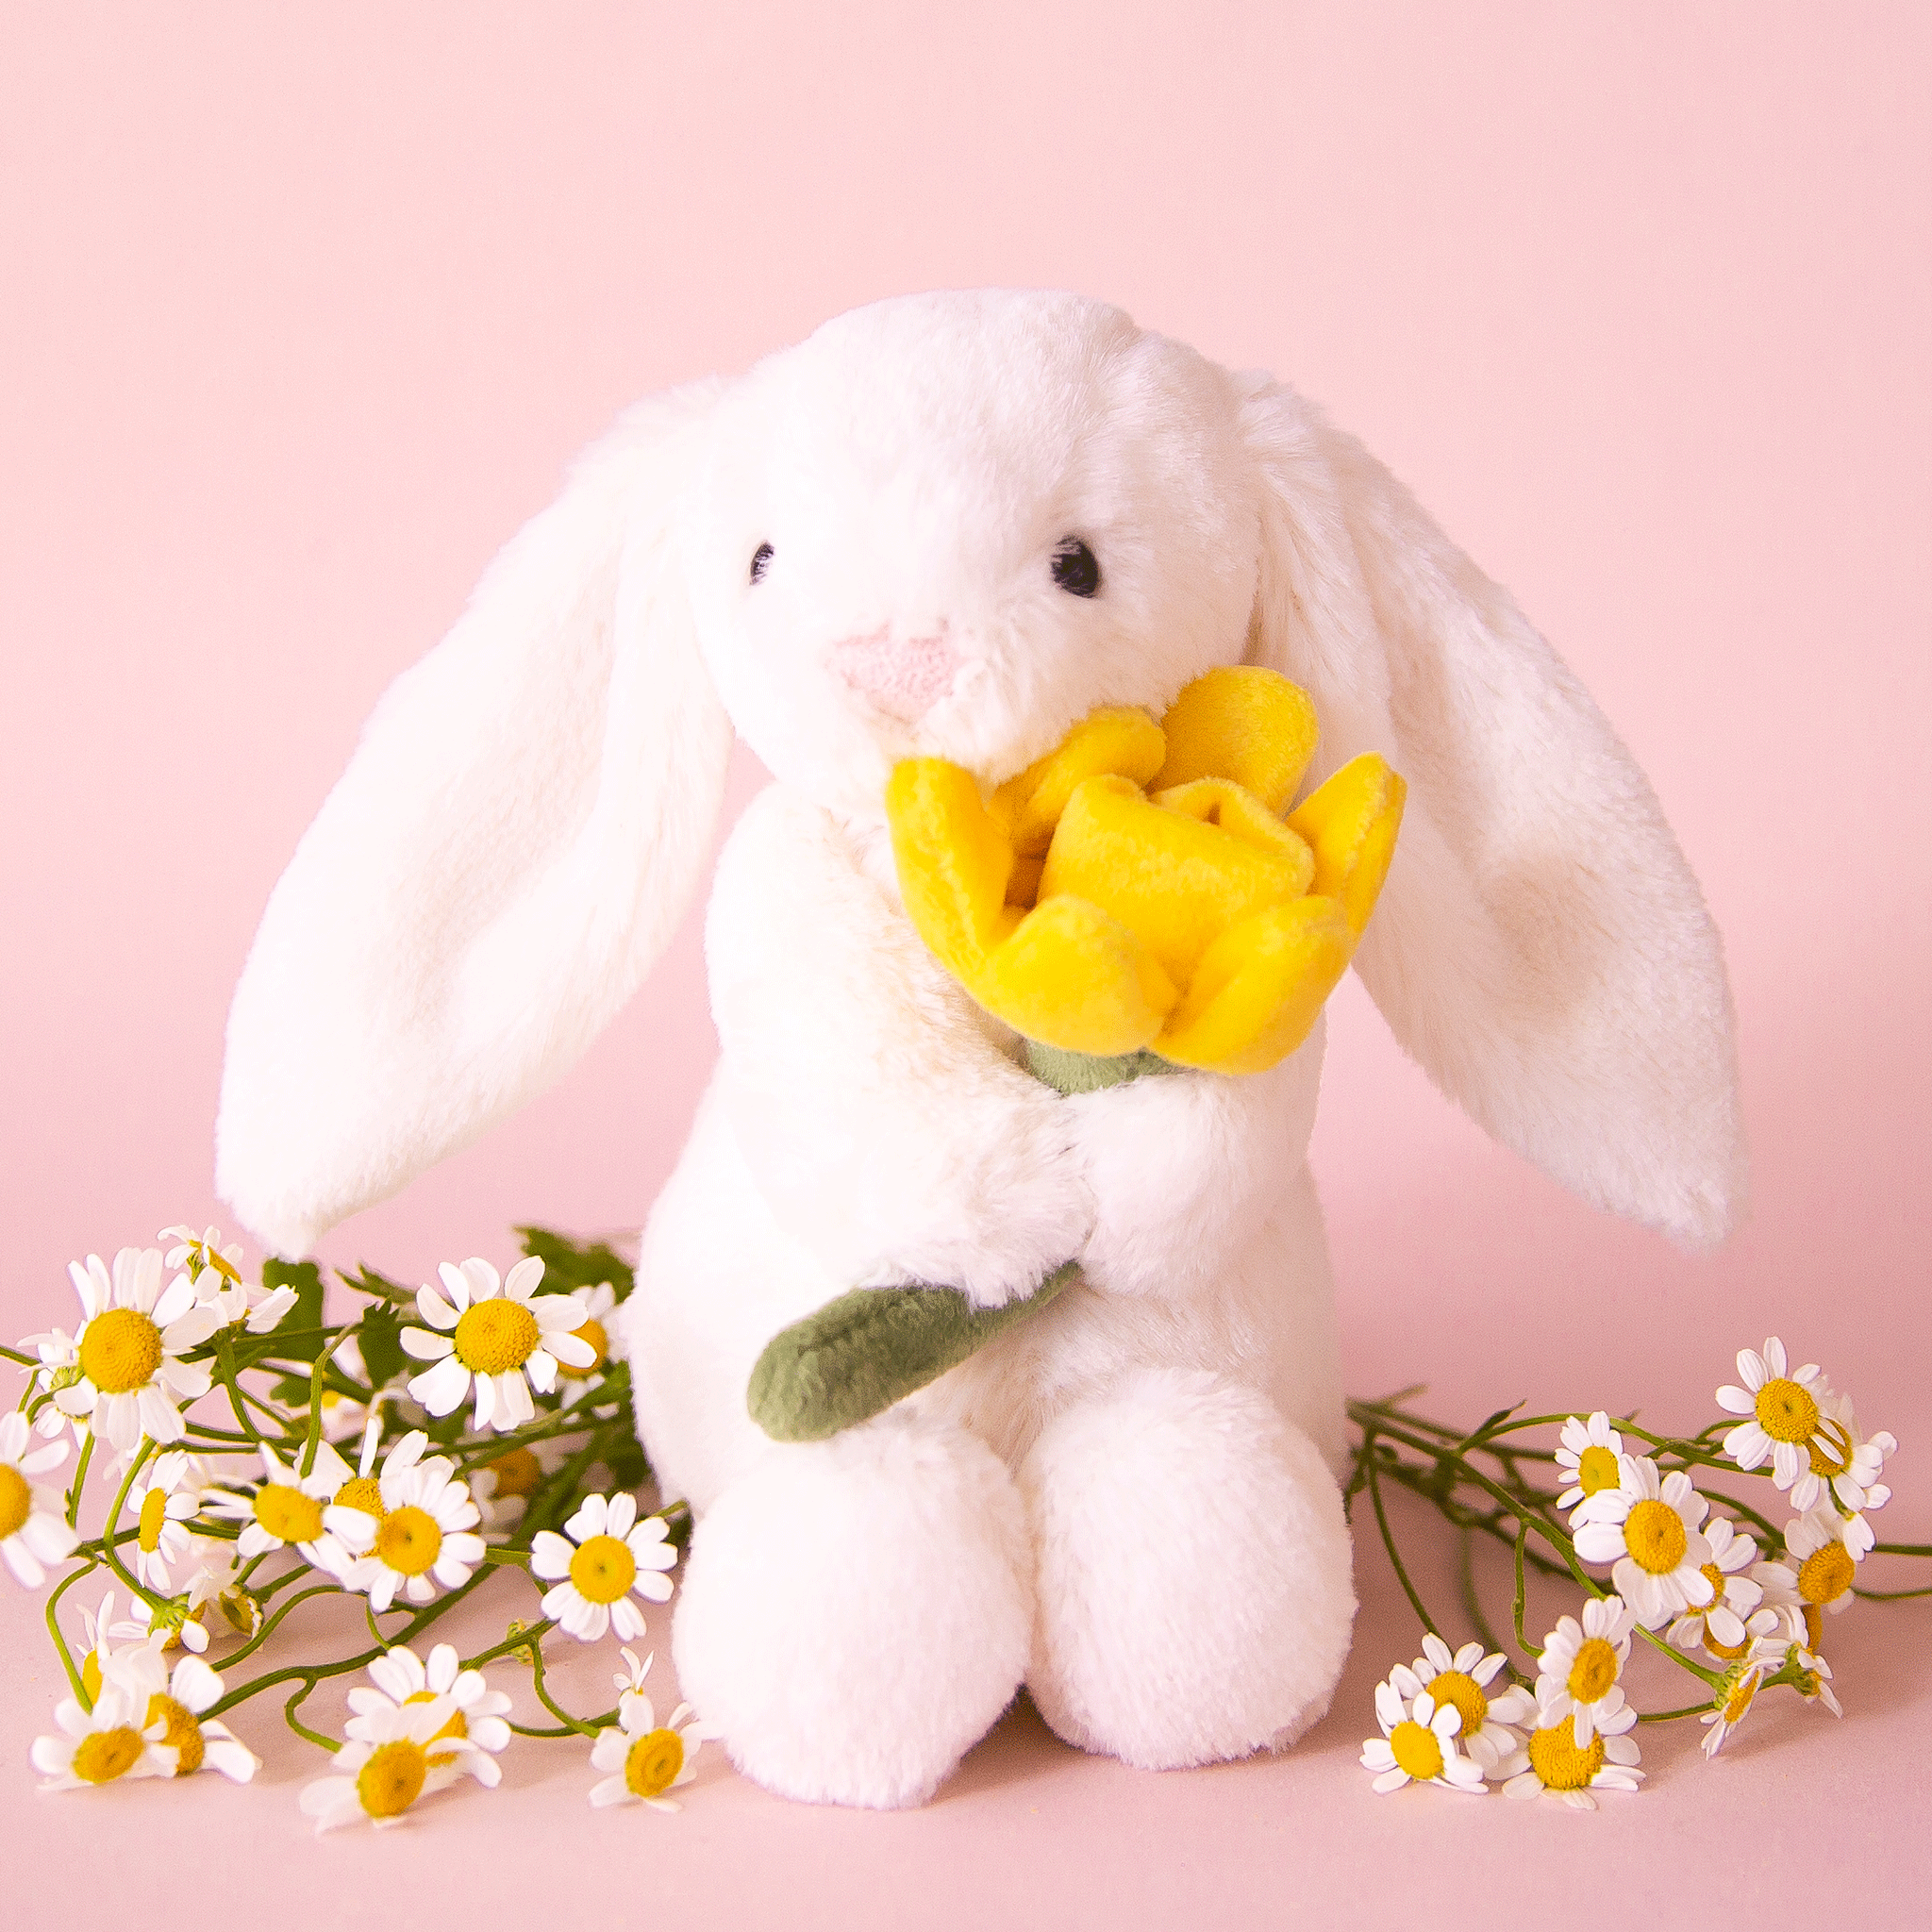 On a pink background is a fuzzy white bunny stuffed animal toy with long floppy ears and holding a stuffed daffodil.